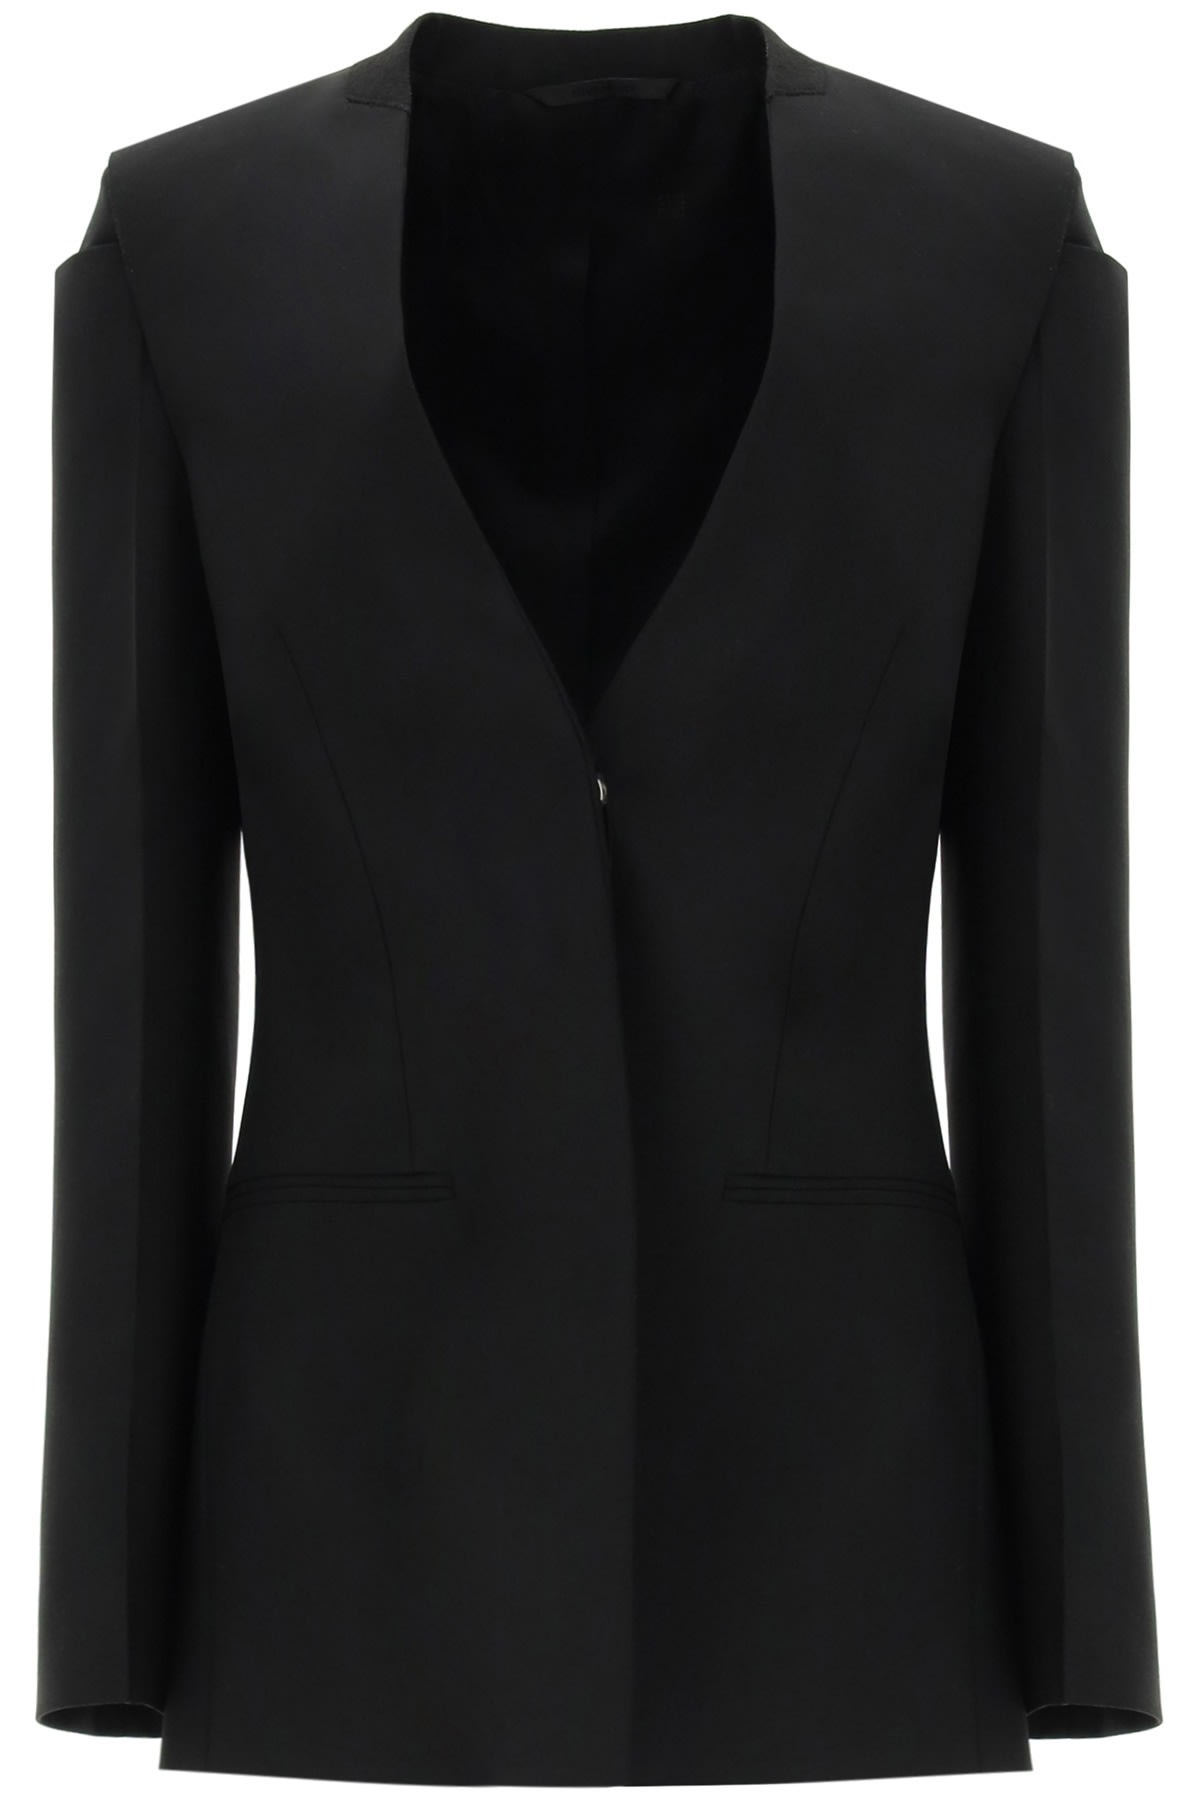 Givenchy Wool And Mohair Blazer